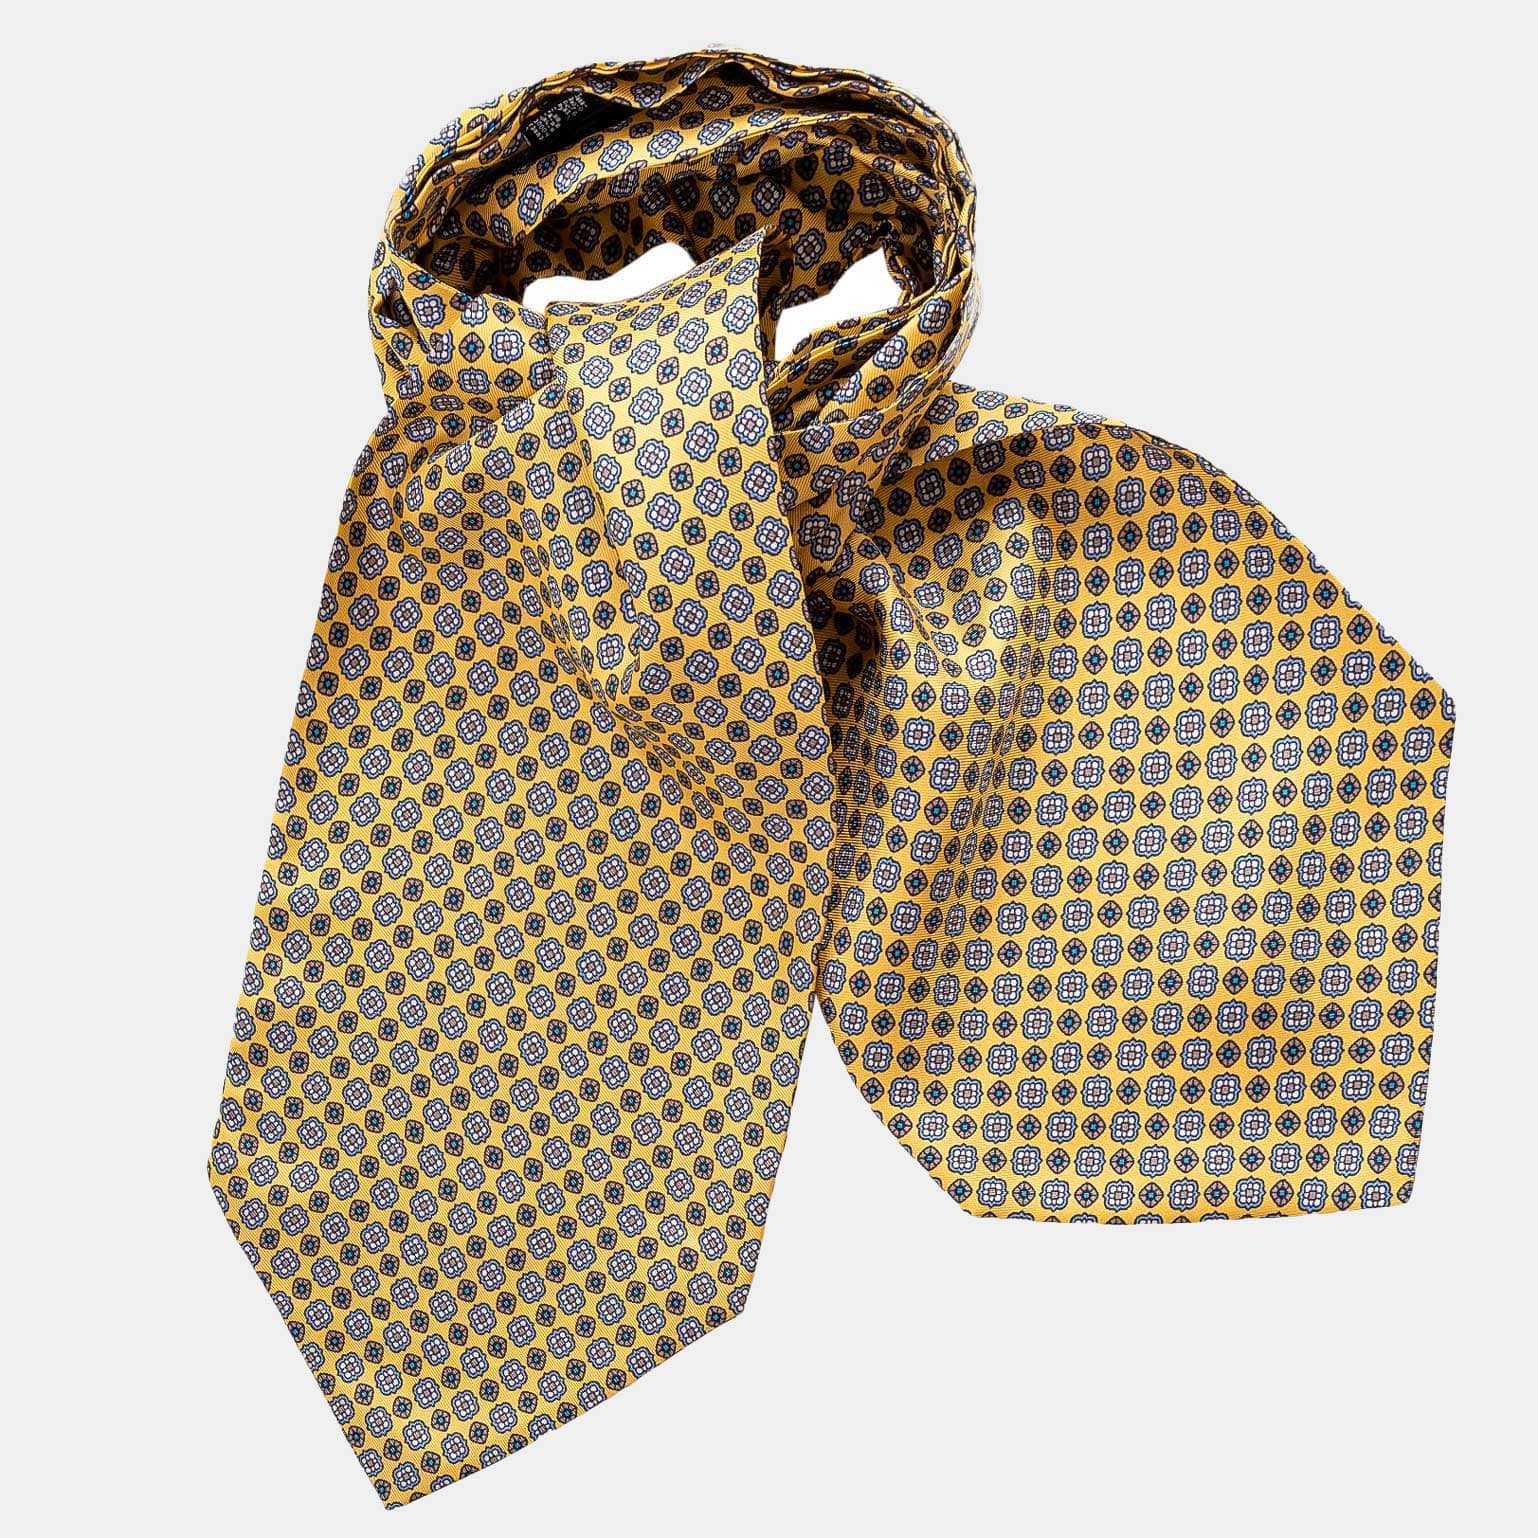 Silk Ascot Tie - Yellow & Blue Print - Made in Italy